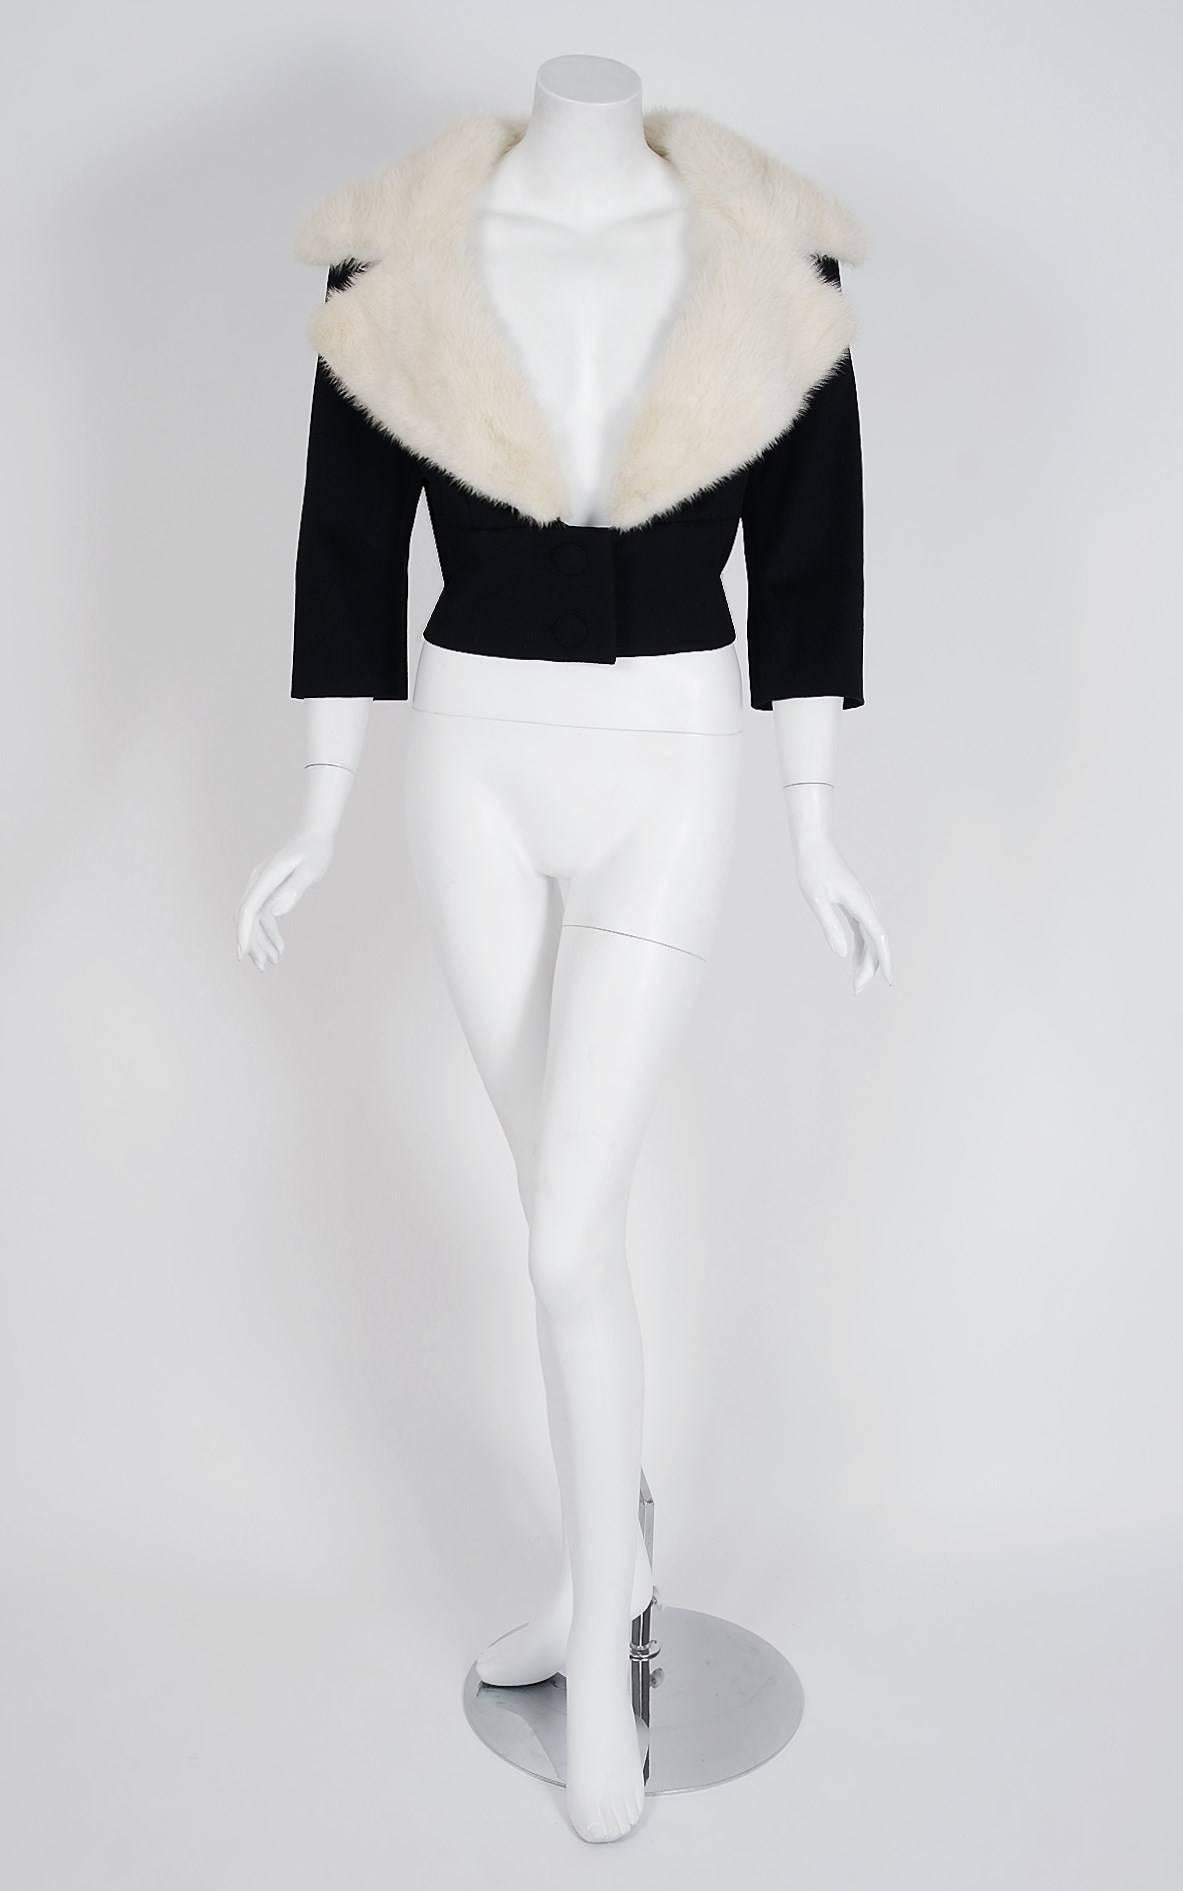 This Jean Patou ivory-white mink and black wool jacket, in the most beautiful silhouette, is pure couture perfection. Jean Patou's affinity for tailored design and elaborate materials is wonderful for the modern woman. Not only is this little number